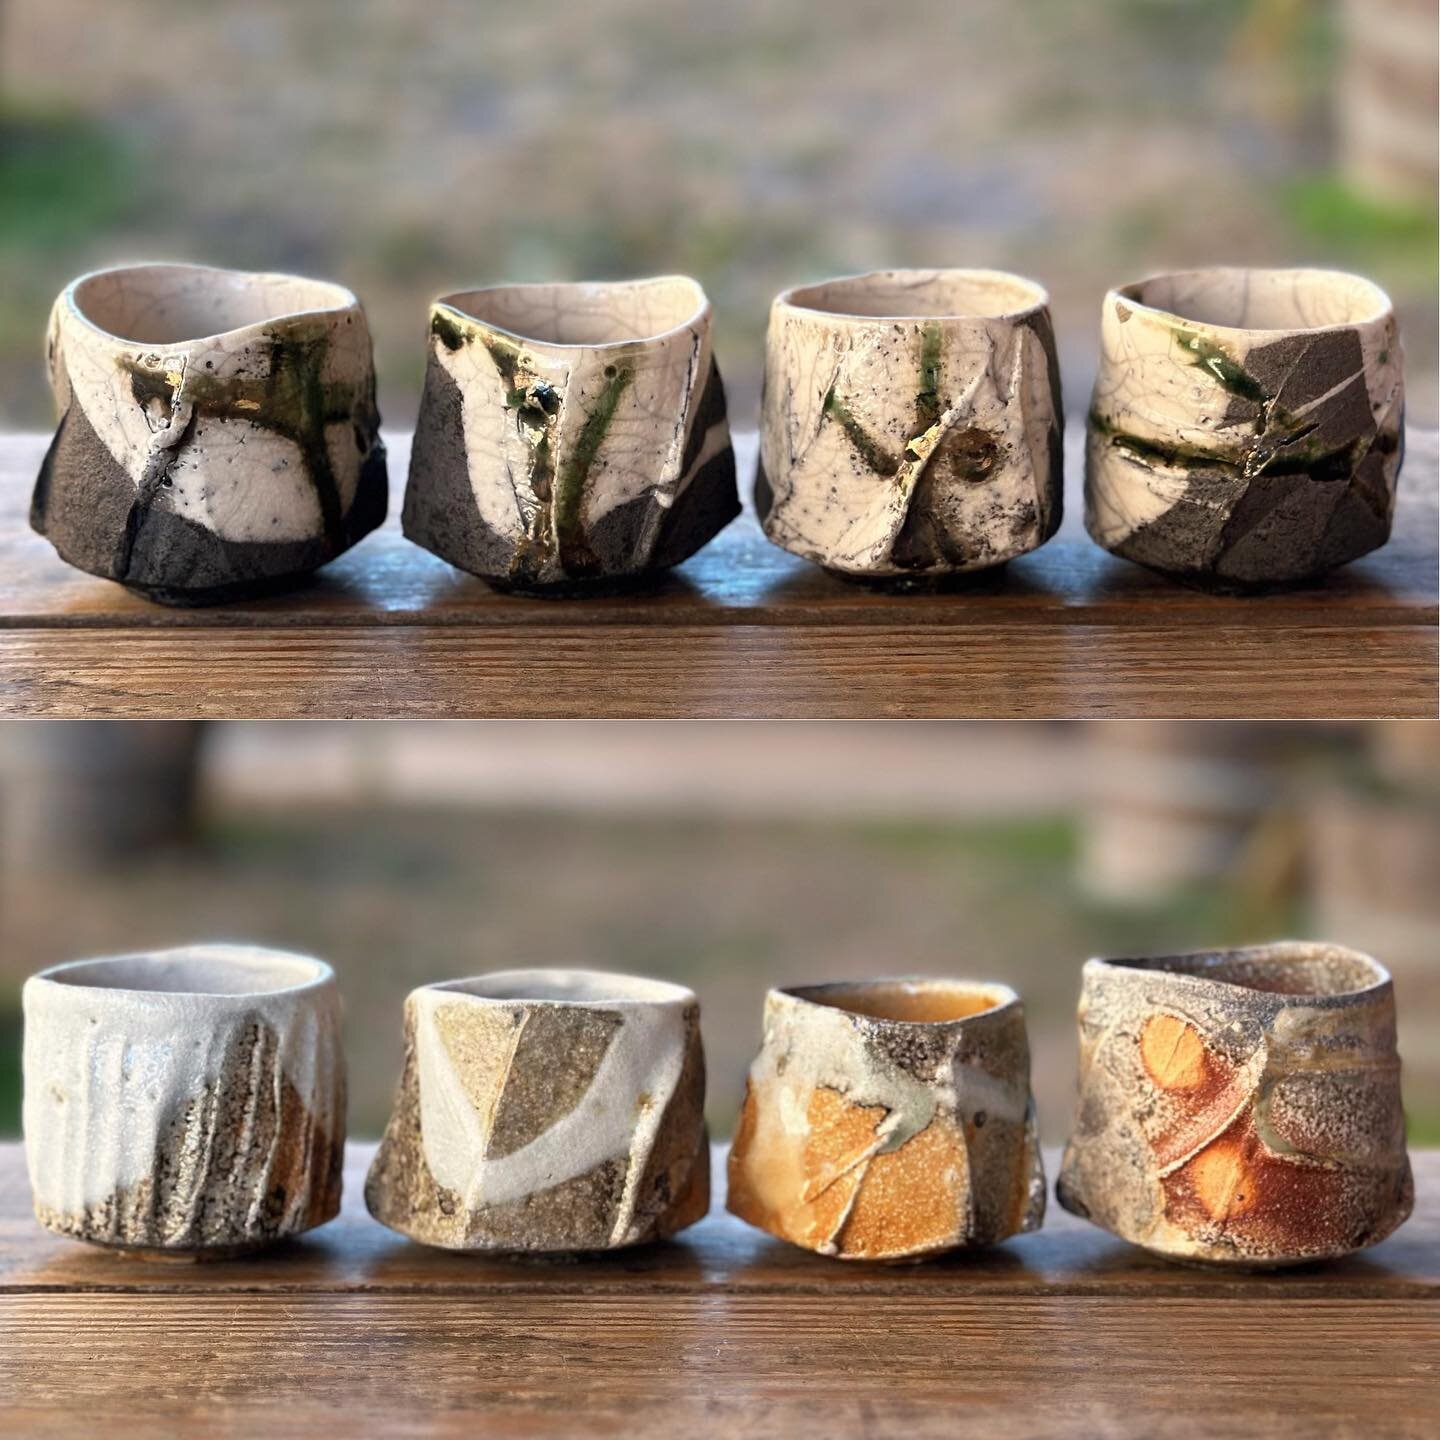 Some Guinomi! Small cups. ぐい呑
Tomorrow!! Holiday Online Sale, Dec. 2nd, 8pm (EST, US) More than 400 new pots will be available.
www.akirasatake.com 
#onlinesale  #オンラインセール  #akirasatakeceramics #clay  #asheville  #guinomi #ぐいのみ　#酒 #sake  #gallerymuge